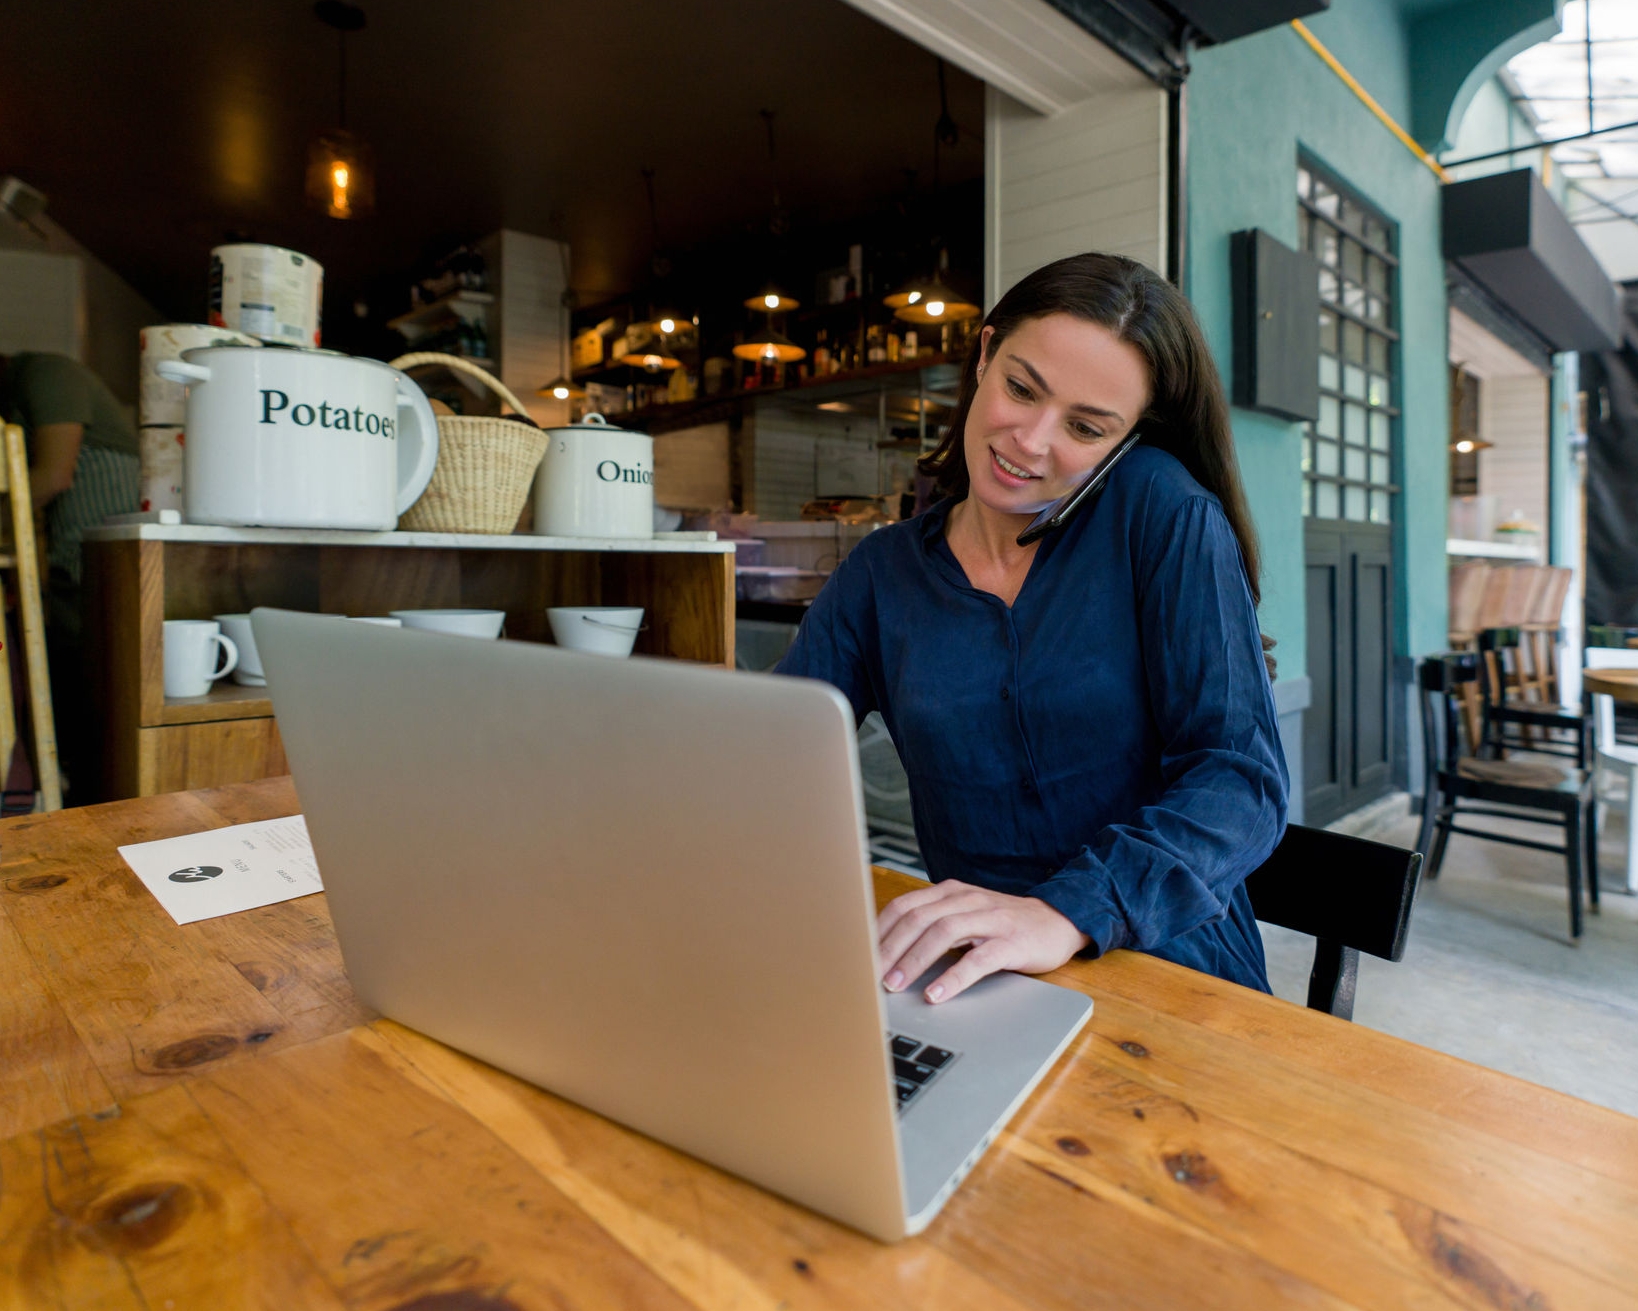 Latin American female entrepreneur working at a coffee shop on her laptop while talking on the phone